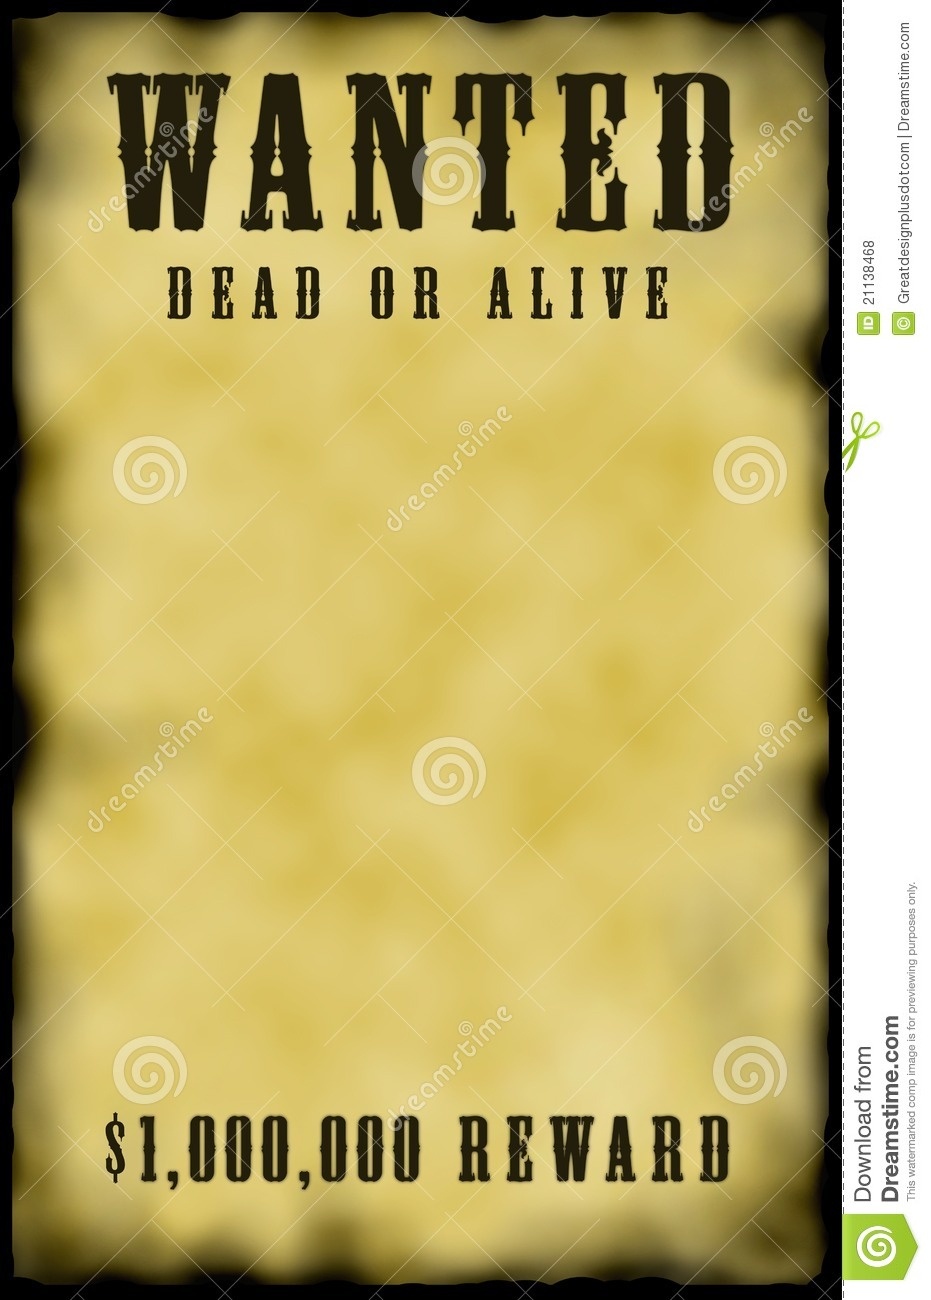 Wanted Poster! Stock Illustration. Illustration Of Criminal - 21138468 - Free Printable Wanted Poster Old West